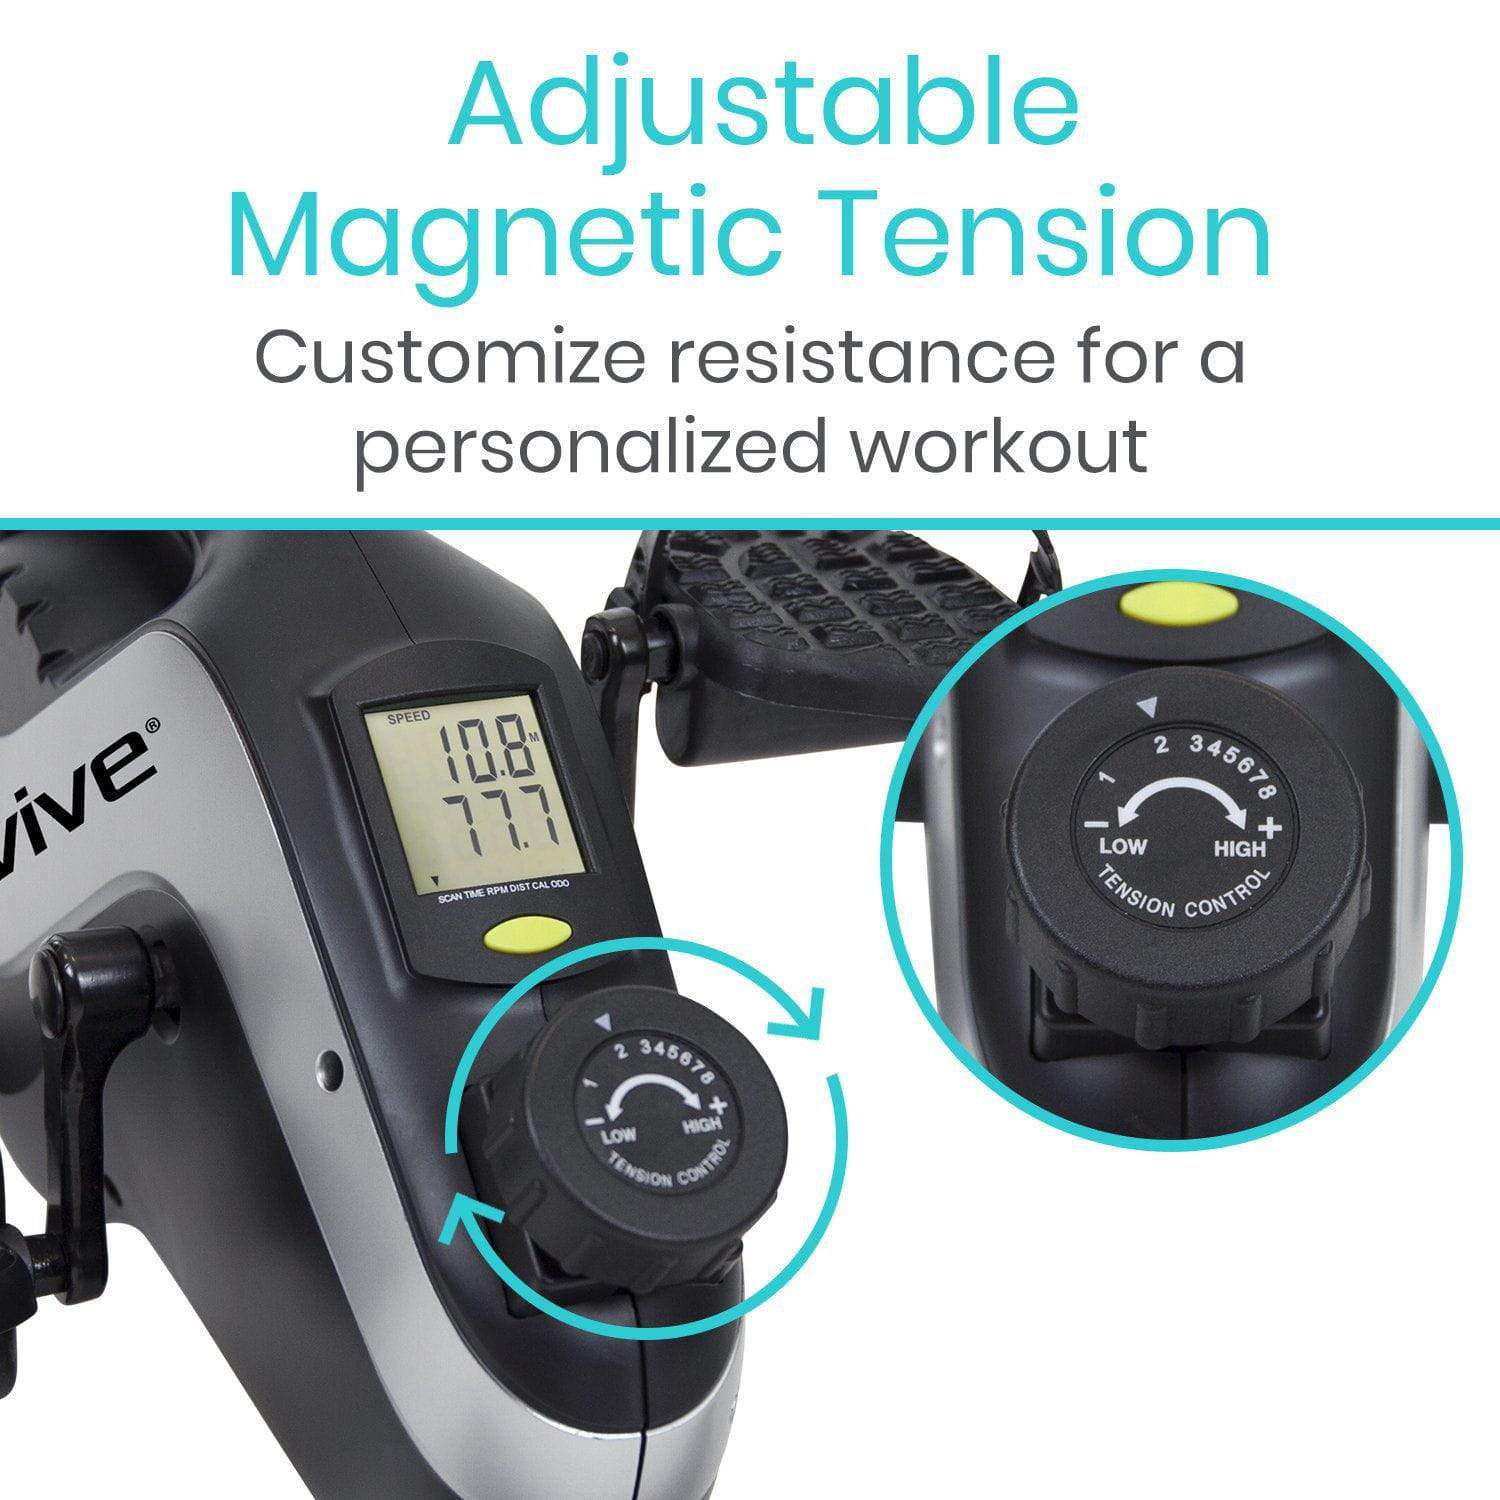 Vive Health Magnetic Pedal Exerciser Compatible with Smart Devices